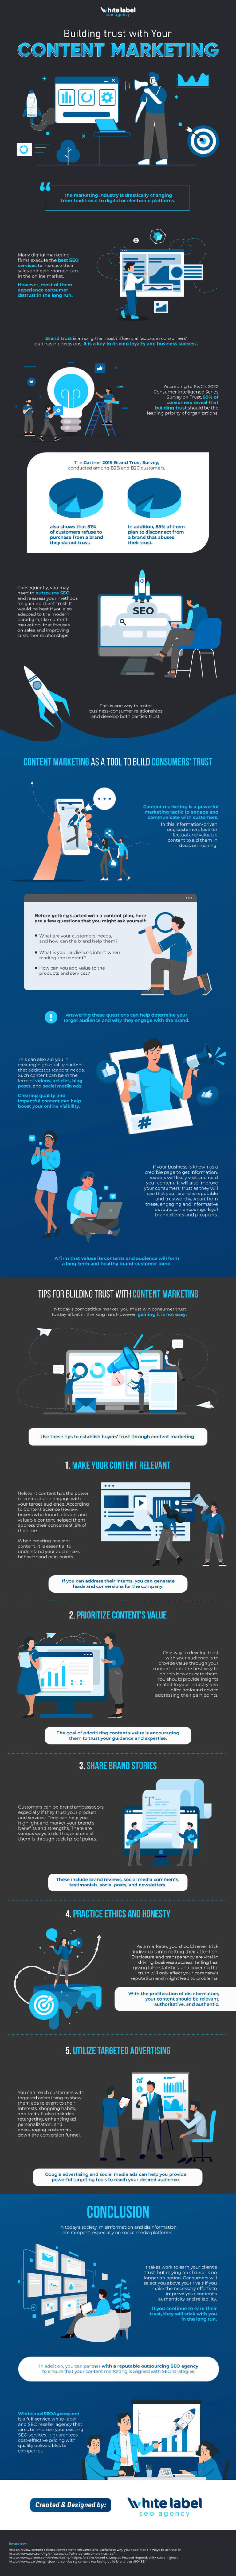 Building Trust with Content Marketing infographic